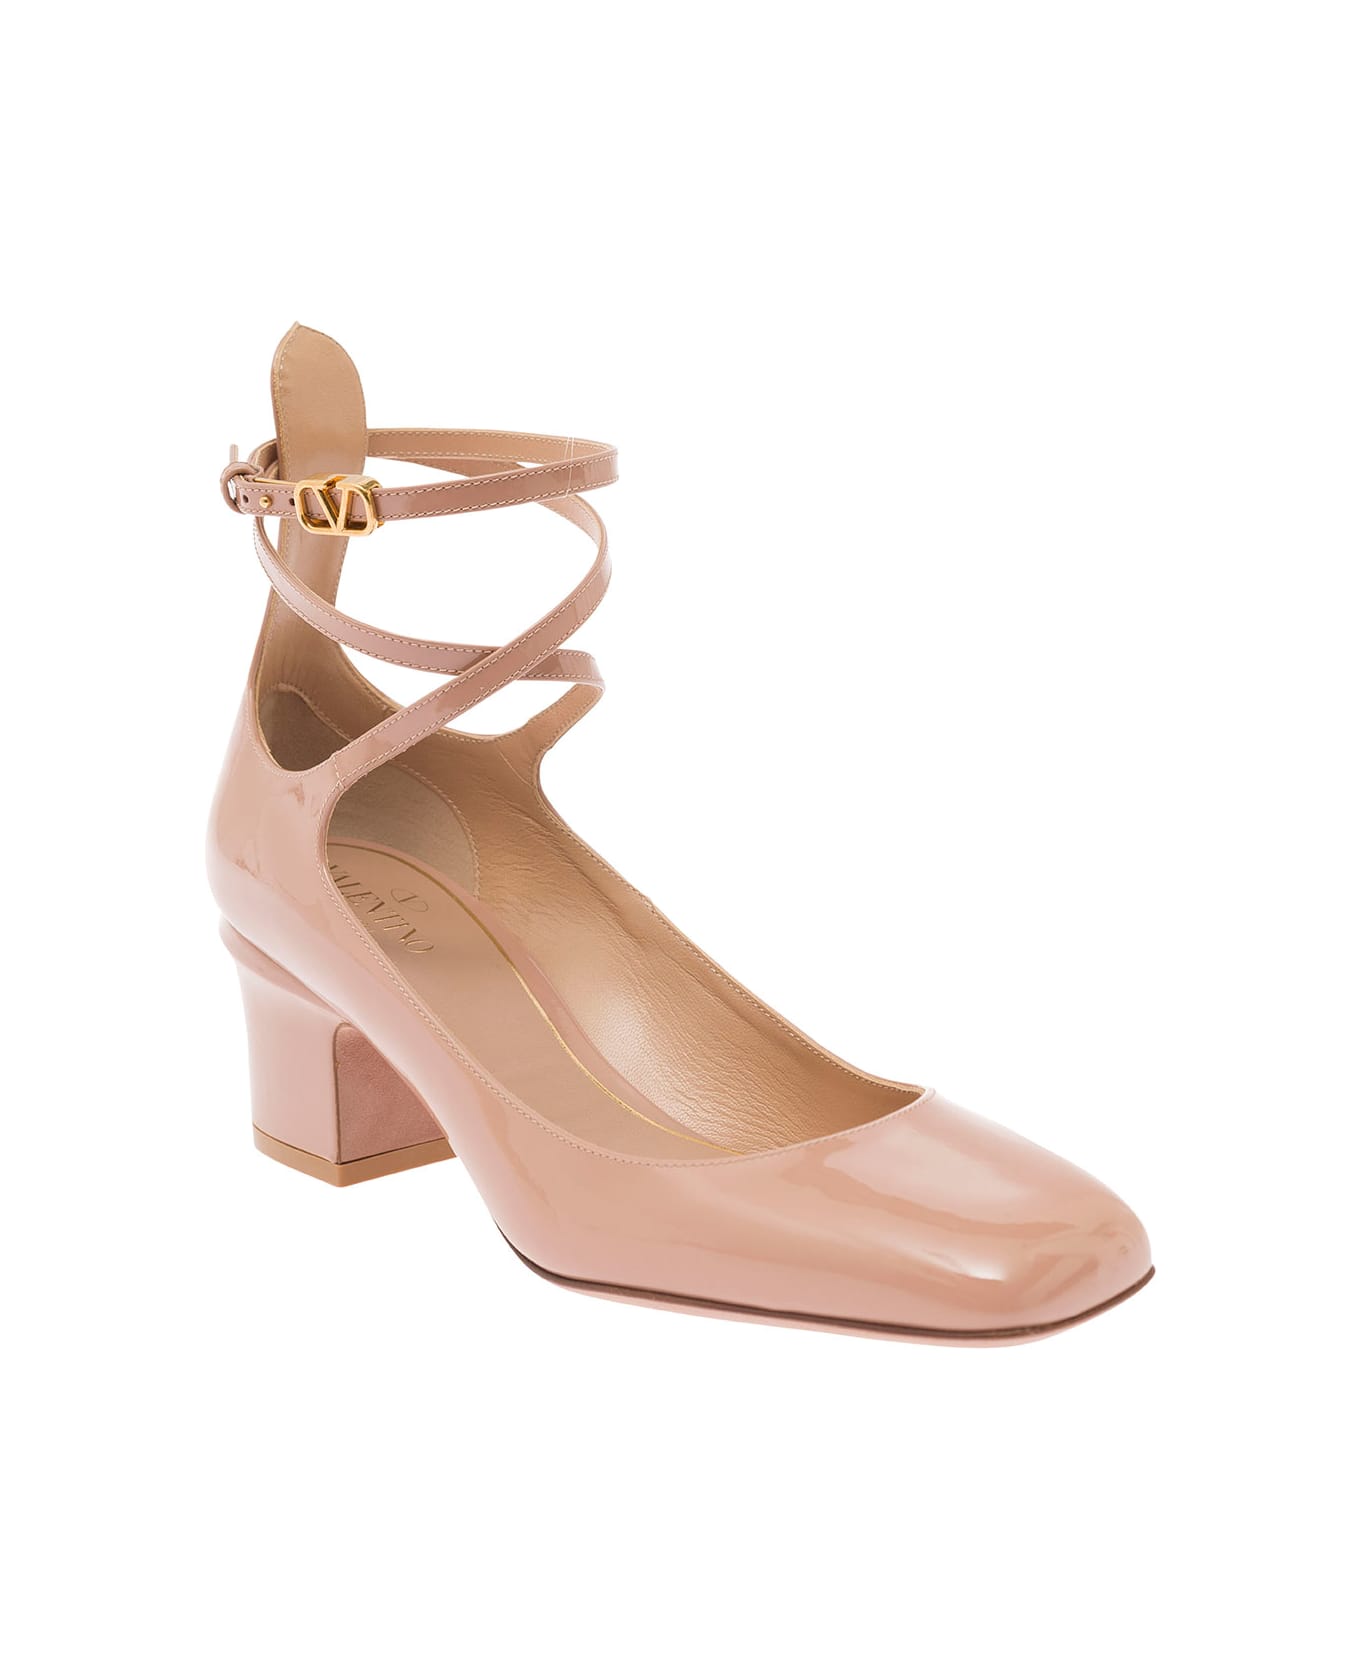 Valentino Garavani Tan-go' Bege Dècolletè With V-logo Buckle In Patent Leather Woman - Pink ハイヒール